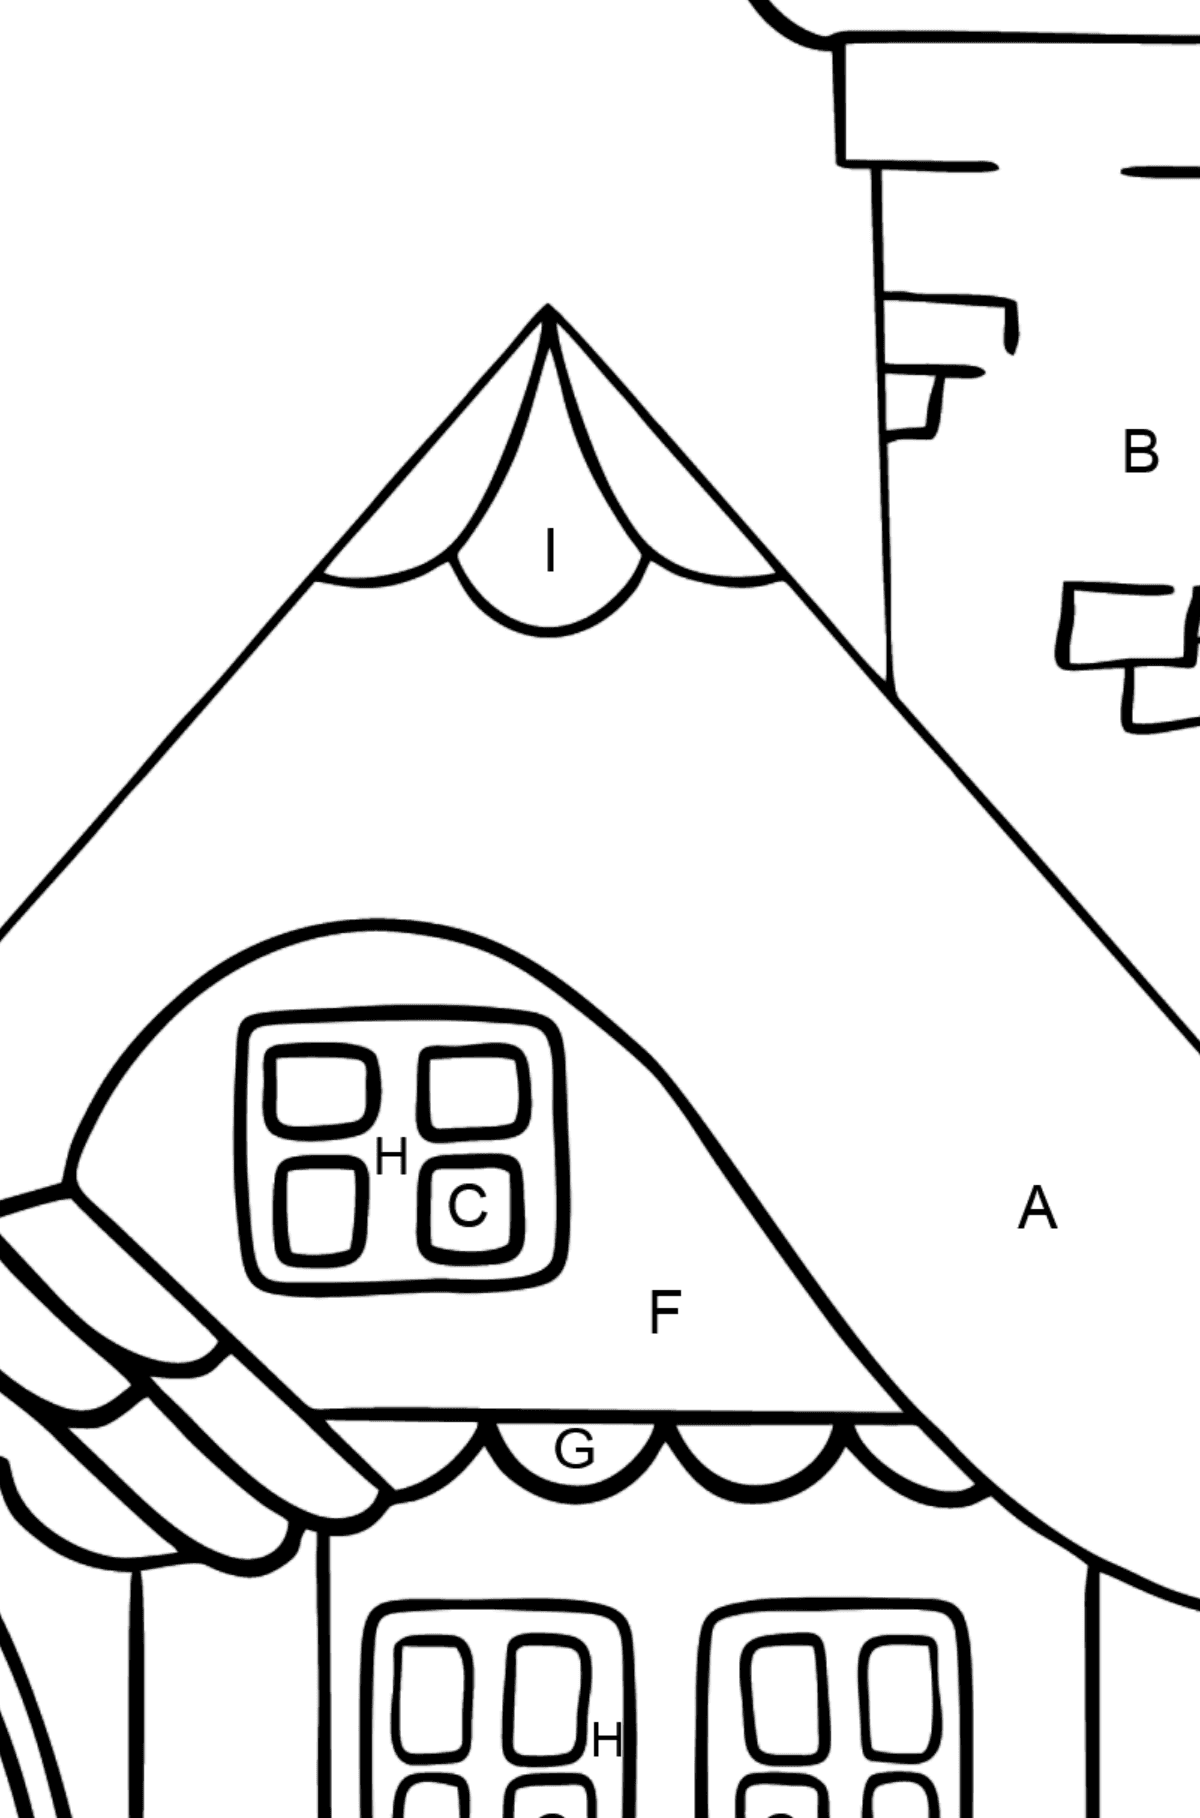 Coloring Page - A Wonderful House - Coloring by Letters for Kids